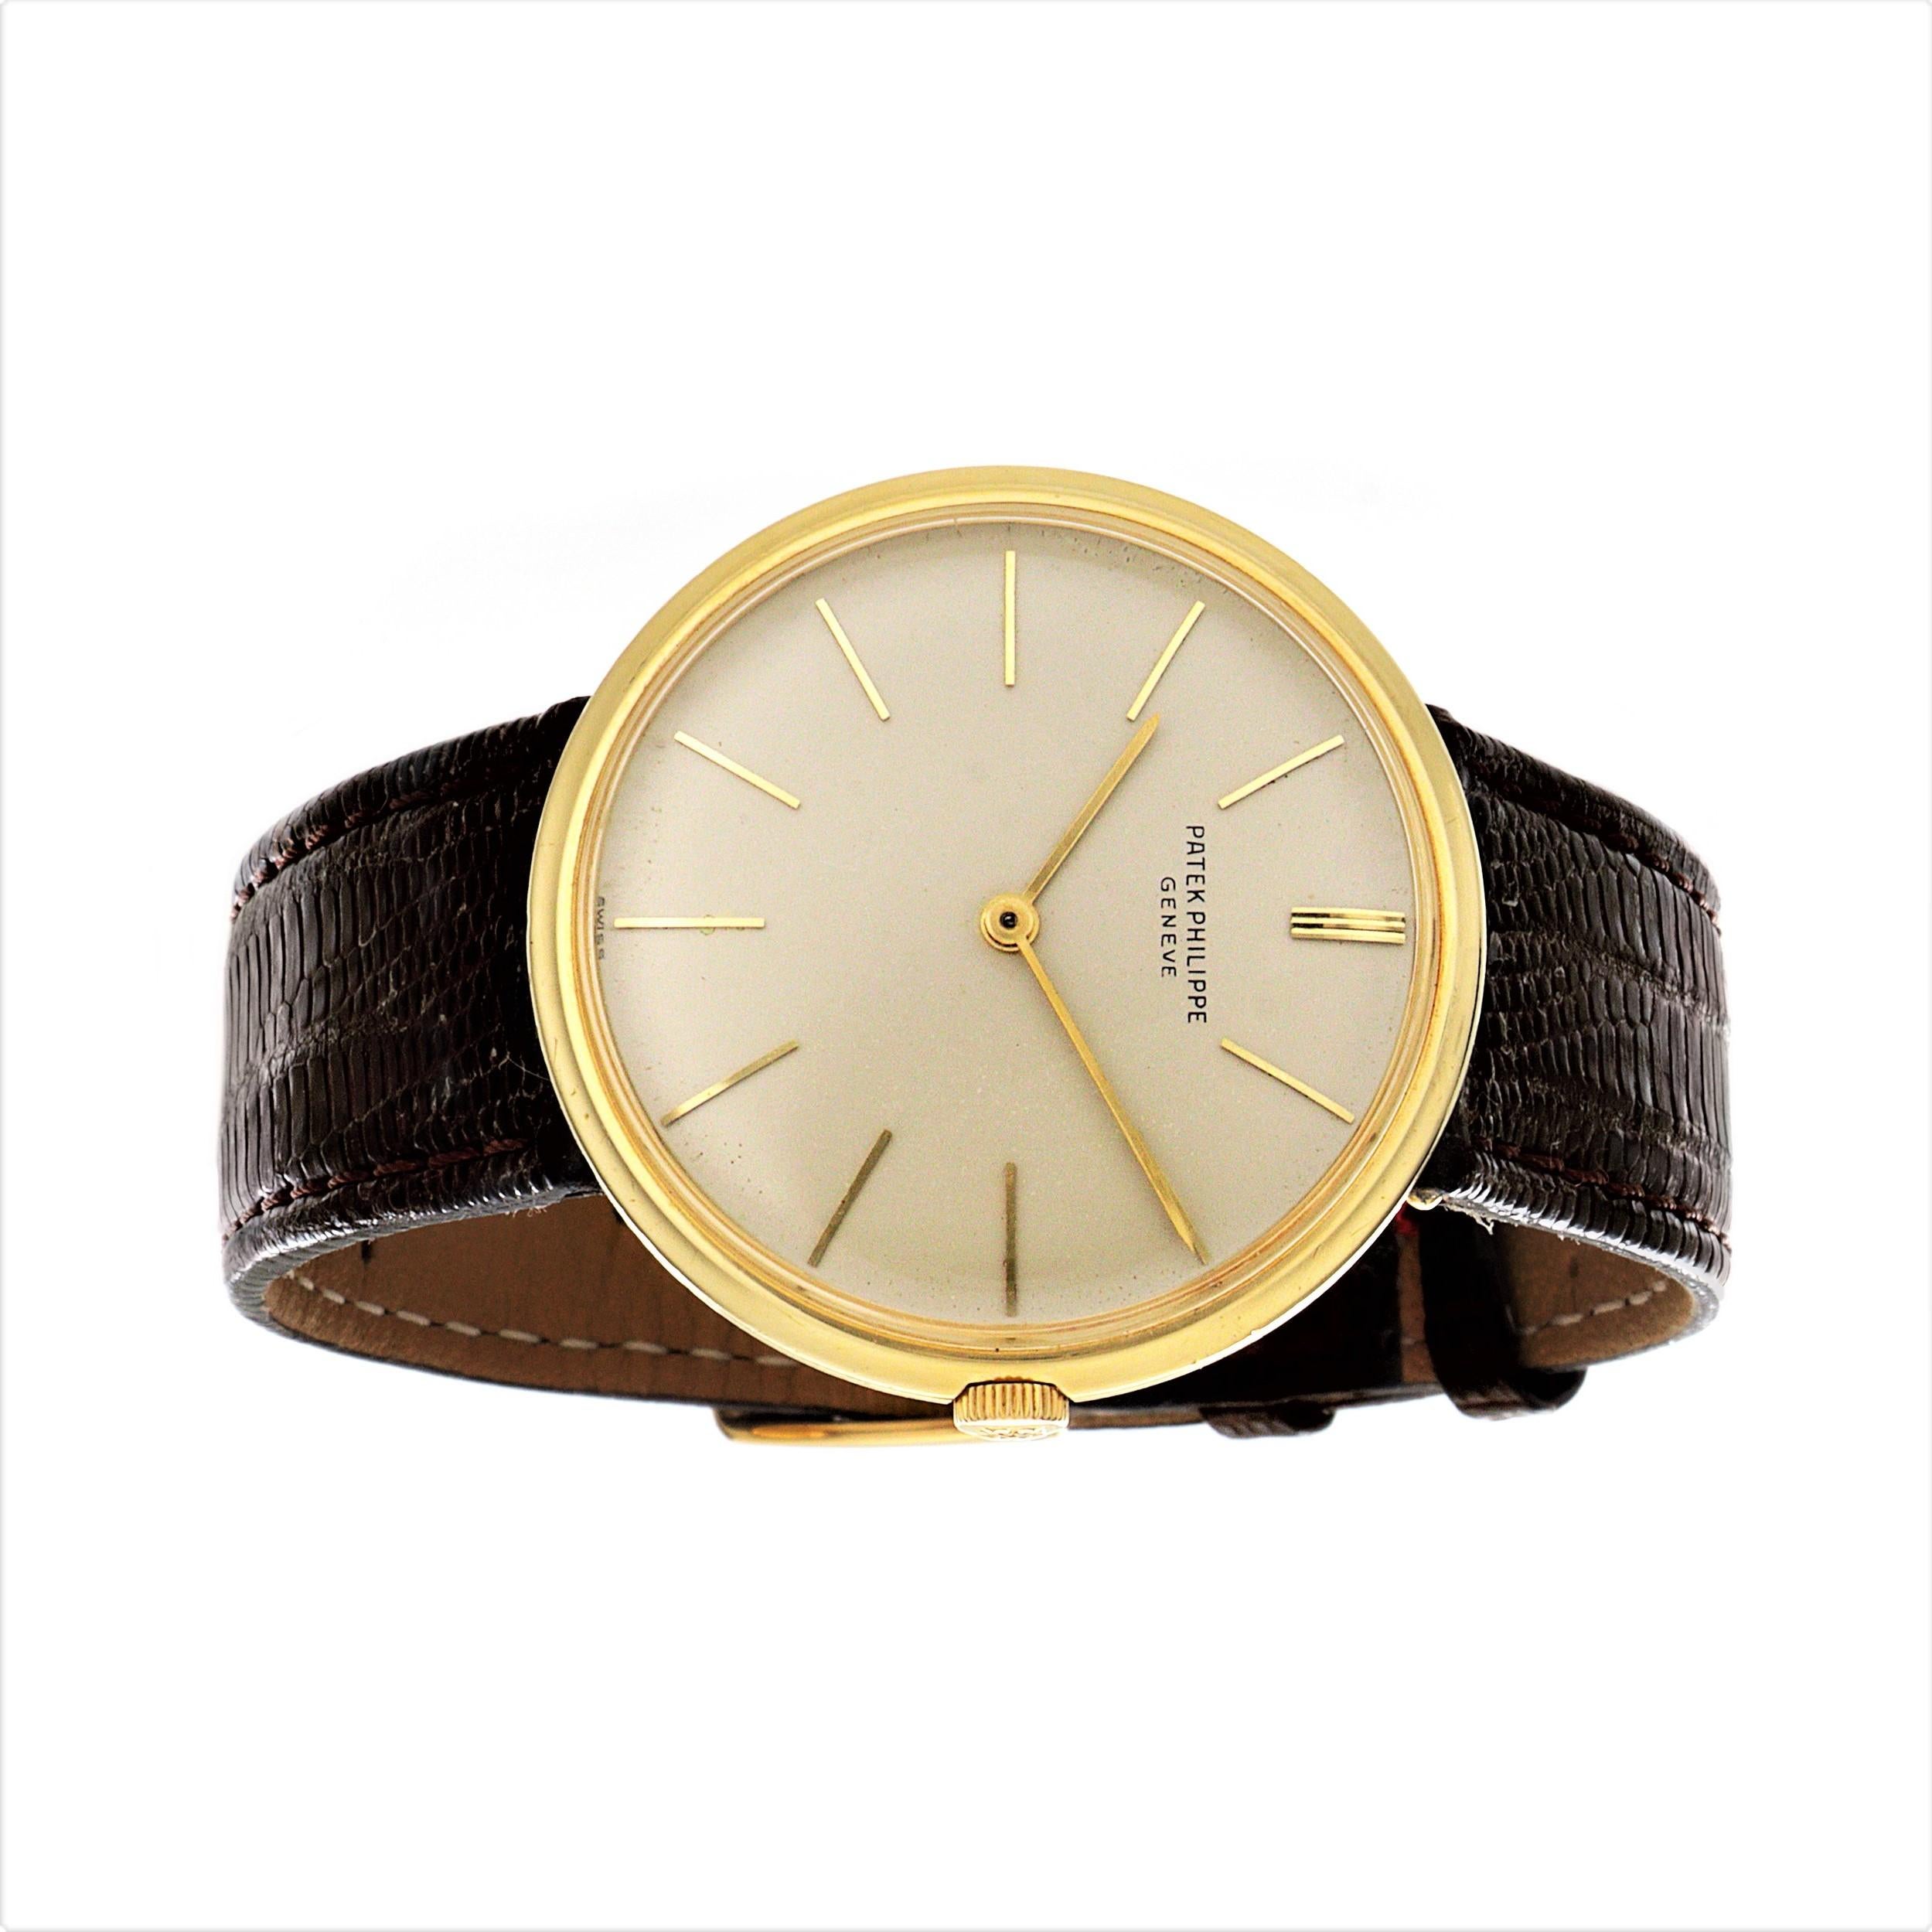 Introduction:
Patek Philippe 2591J Calatrava.  The watch is made in 18 Karat yellow gold and measures 35mm.  The watch was made in the mid 1962, it comes with a silver cream dial, raised gold hour markers.  The watch is fitted with a 23-300 18-jewel